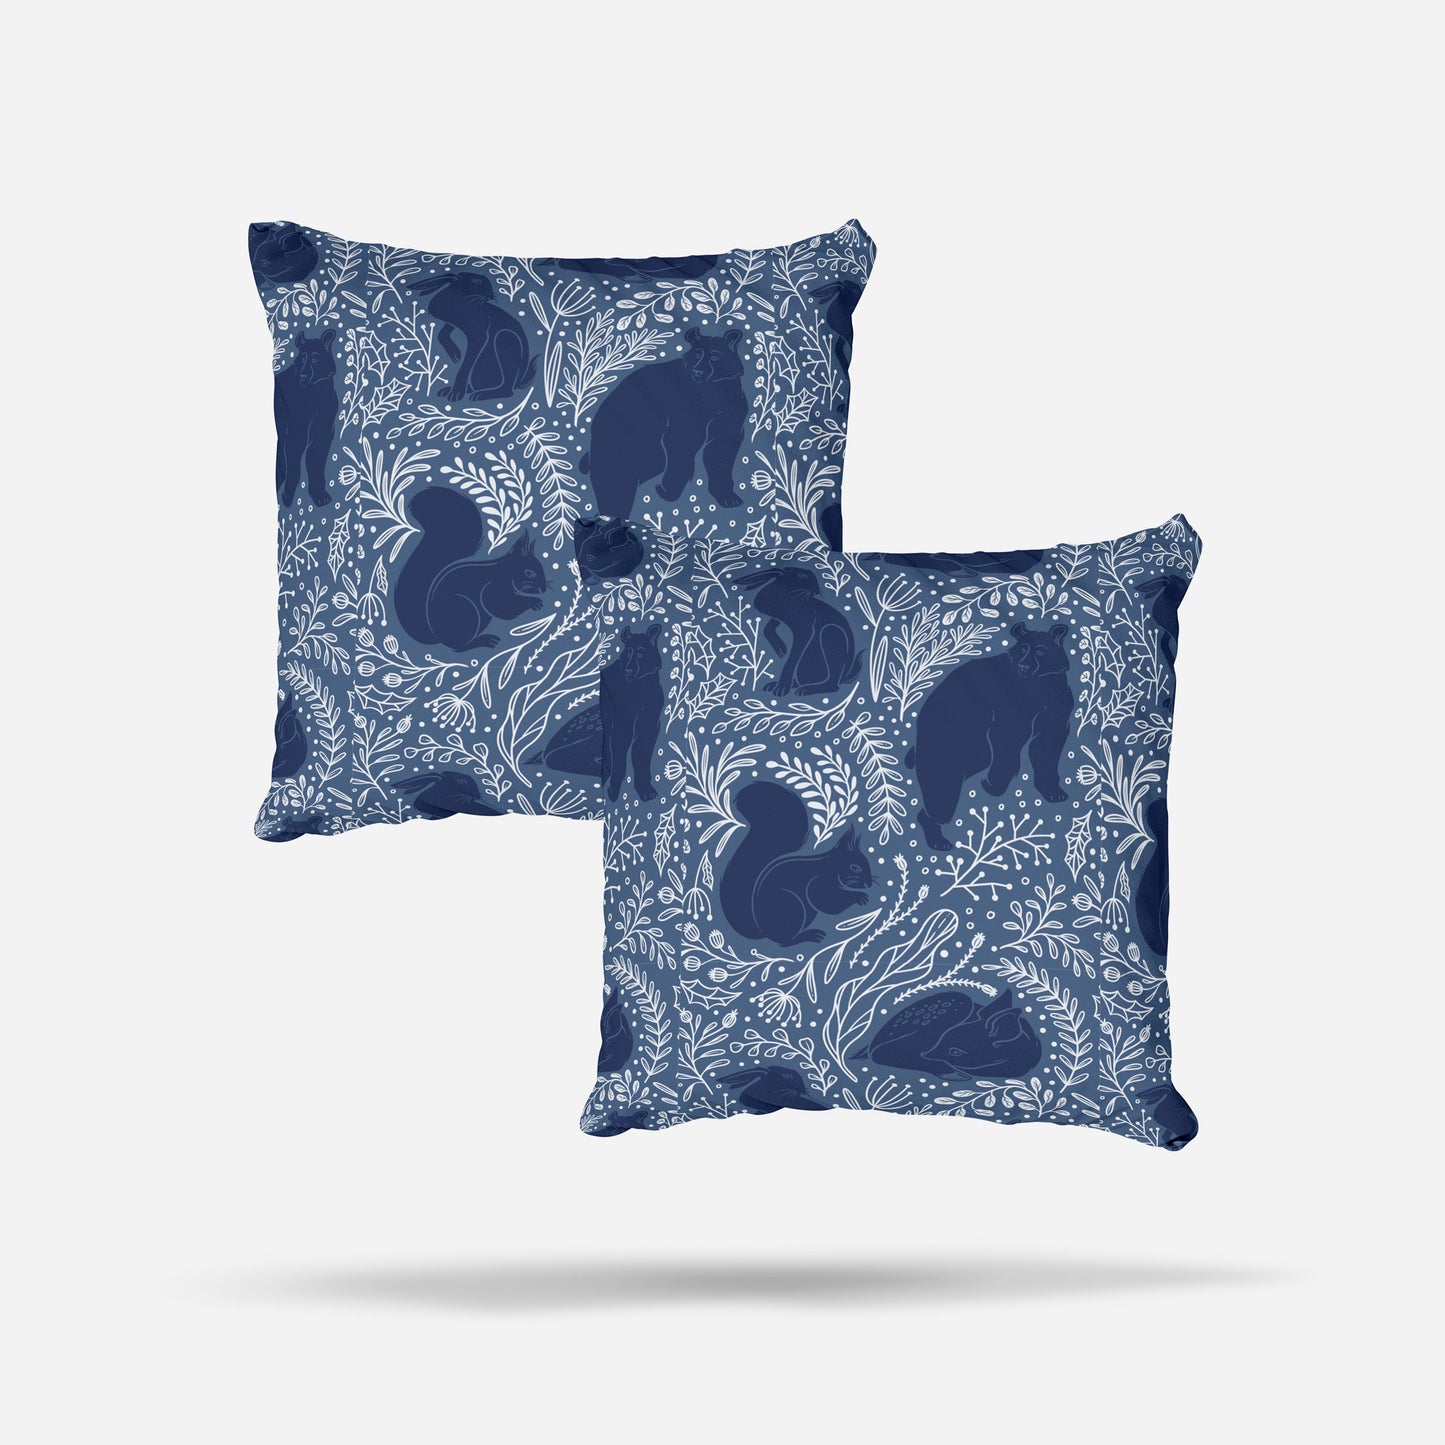 Set of 2 Square Pillows